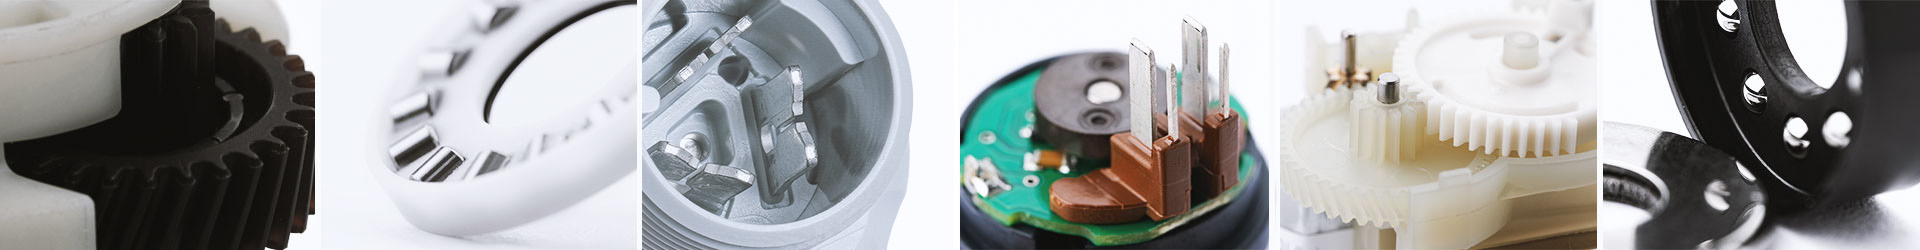 Plastic Injection Molding for your parts | Ekko-Meister AG